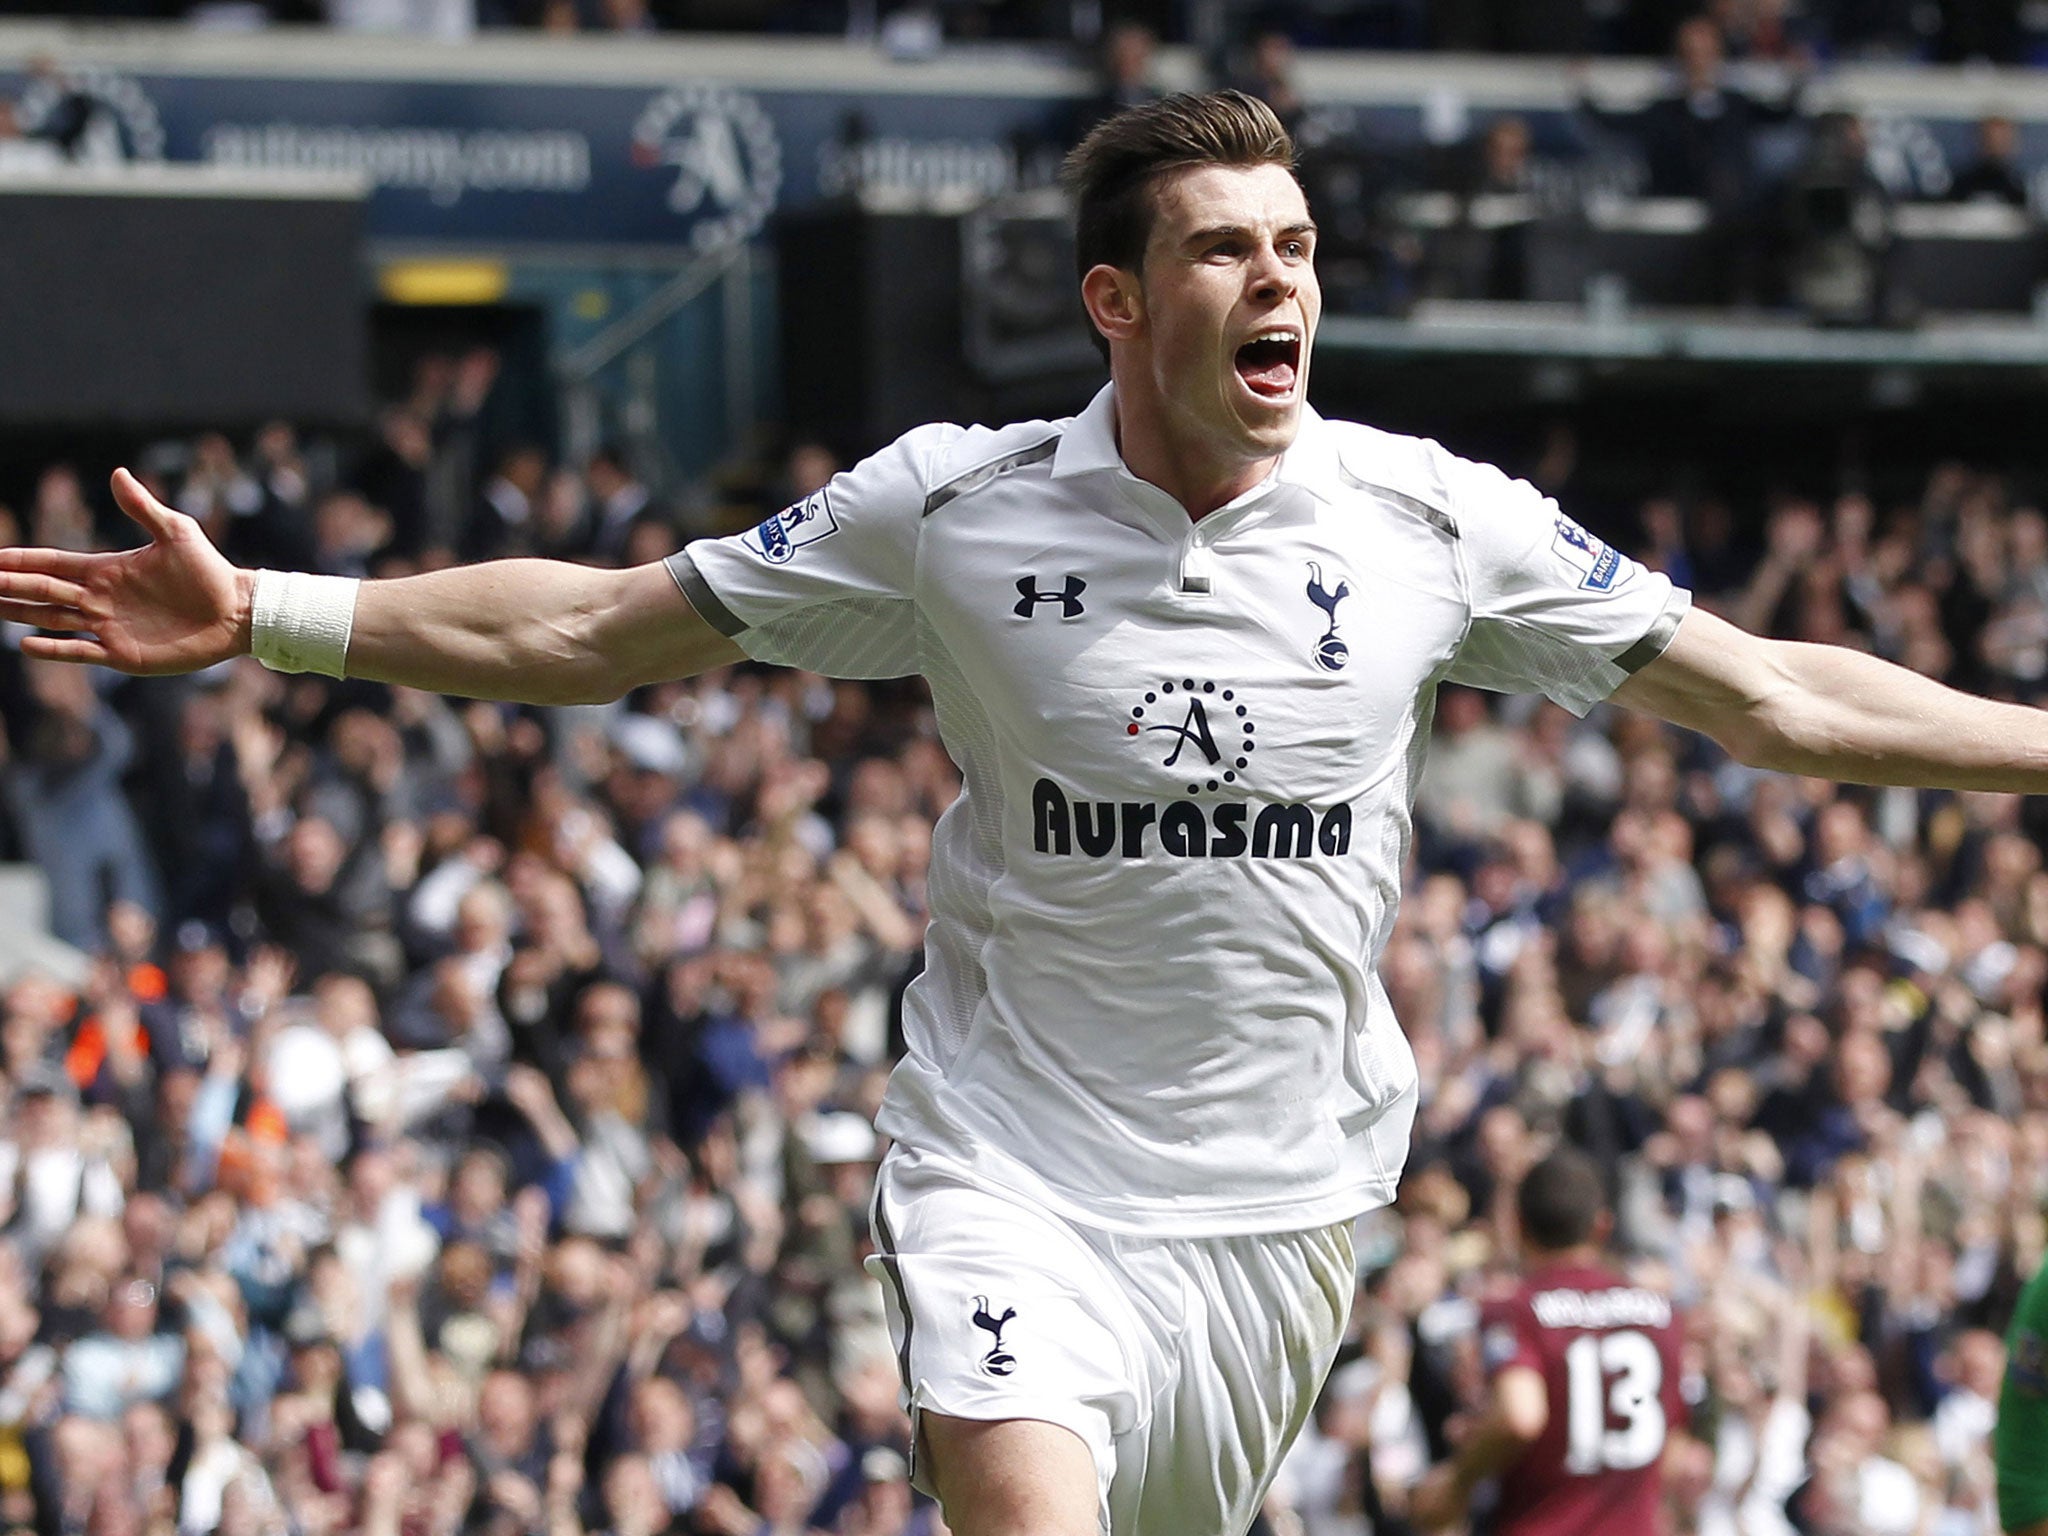 Gareth Bale's progress at Spurs has surprised many people